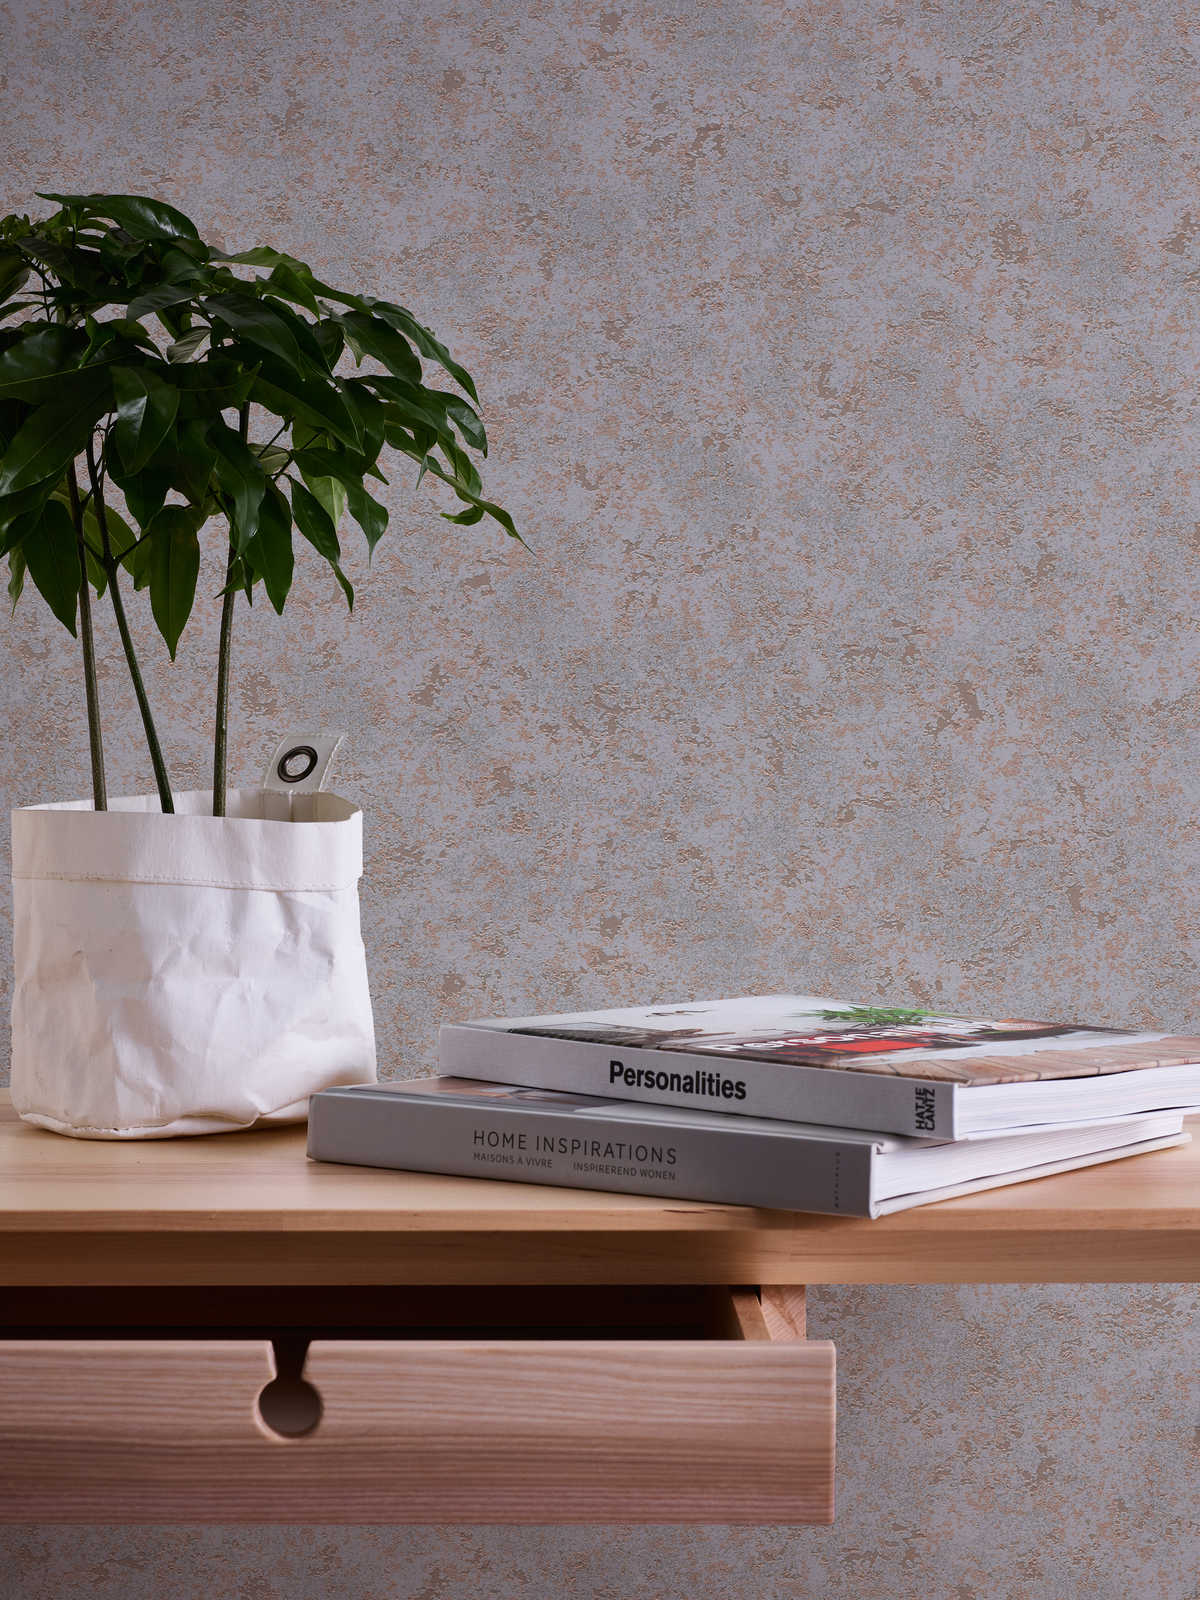             Non-woven wallpaper with textured pattern in plaster look - grey
        